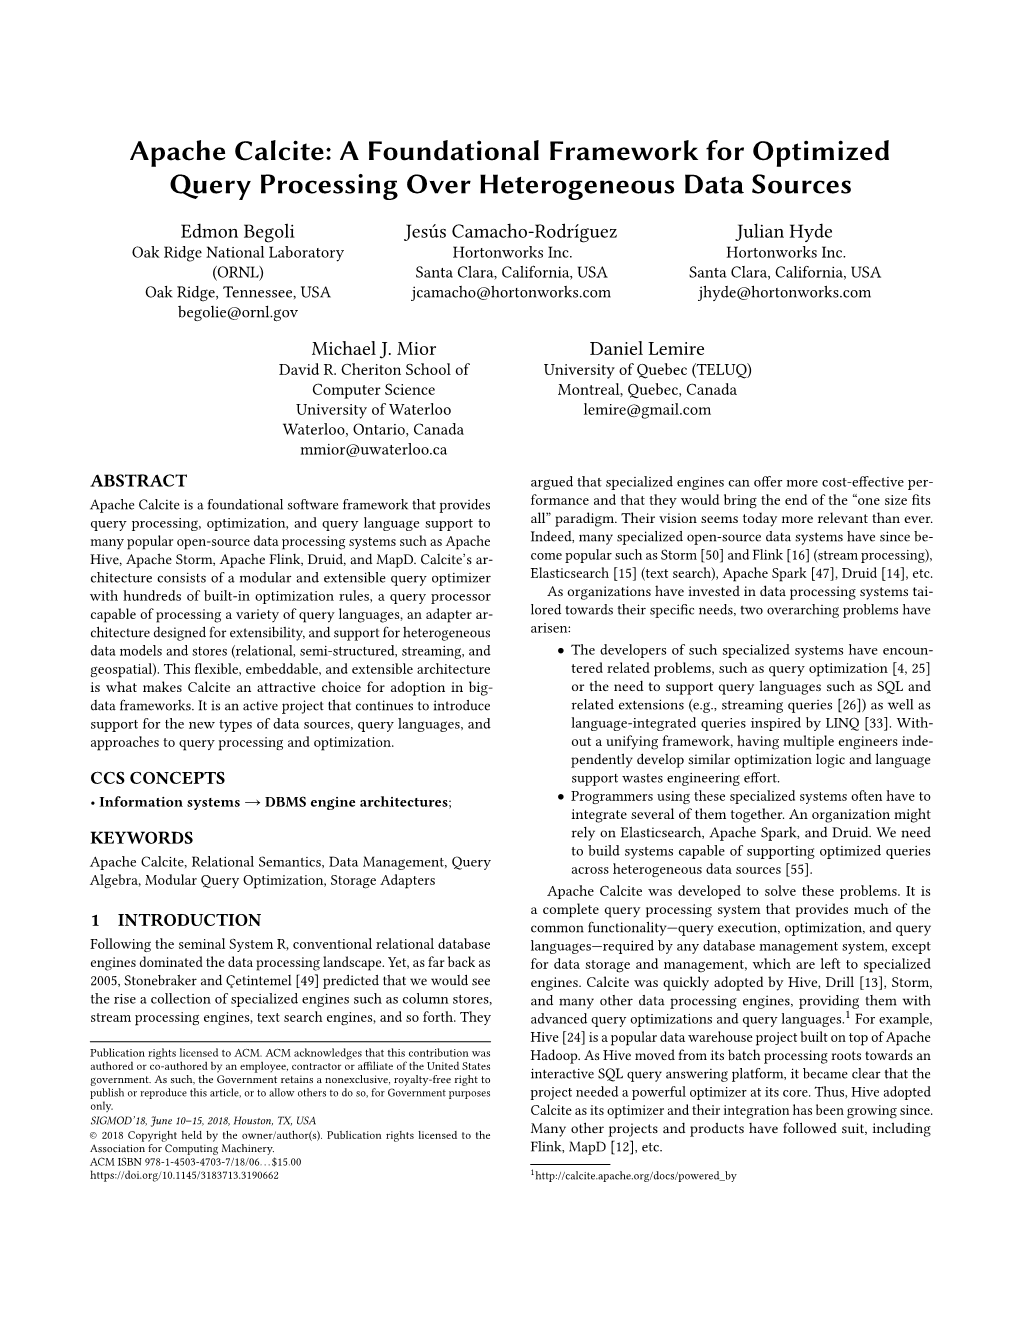 Apache Calcite: a Foundational Framework for Optimized Query Processing Over Heterogeneous Data Sources